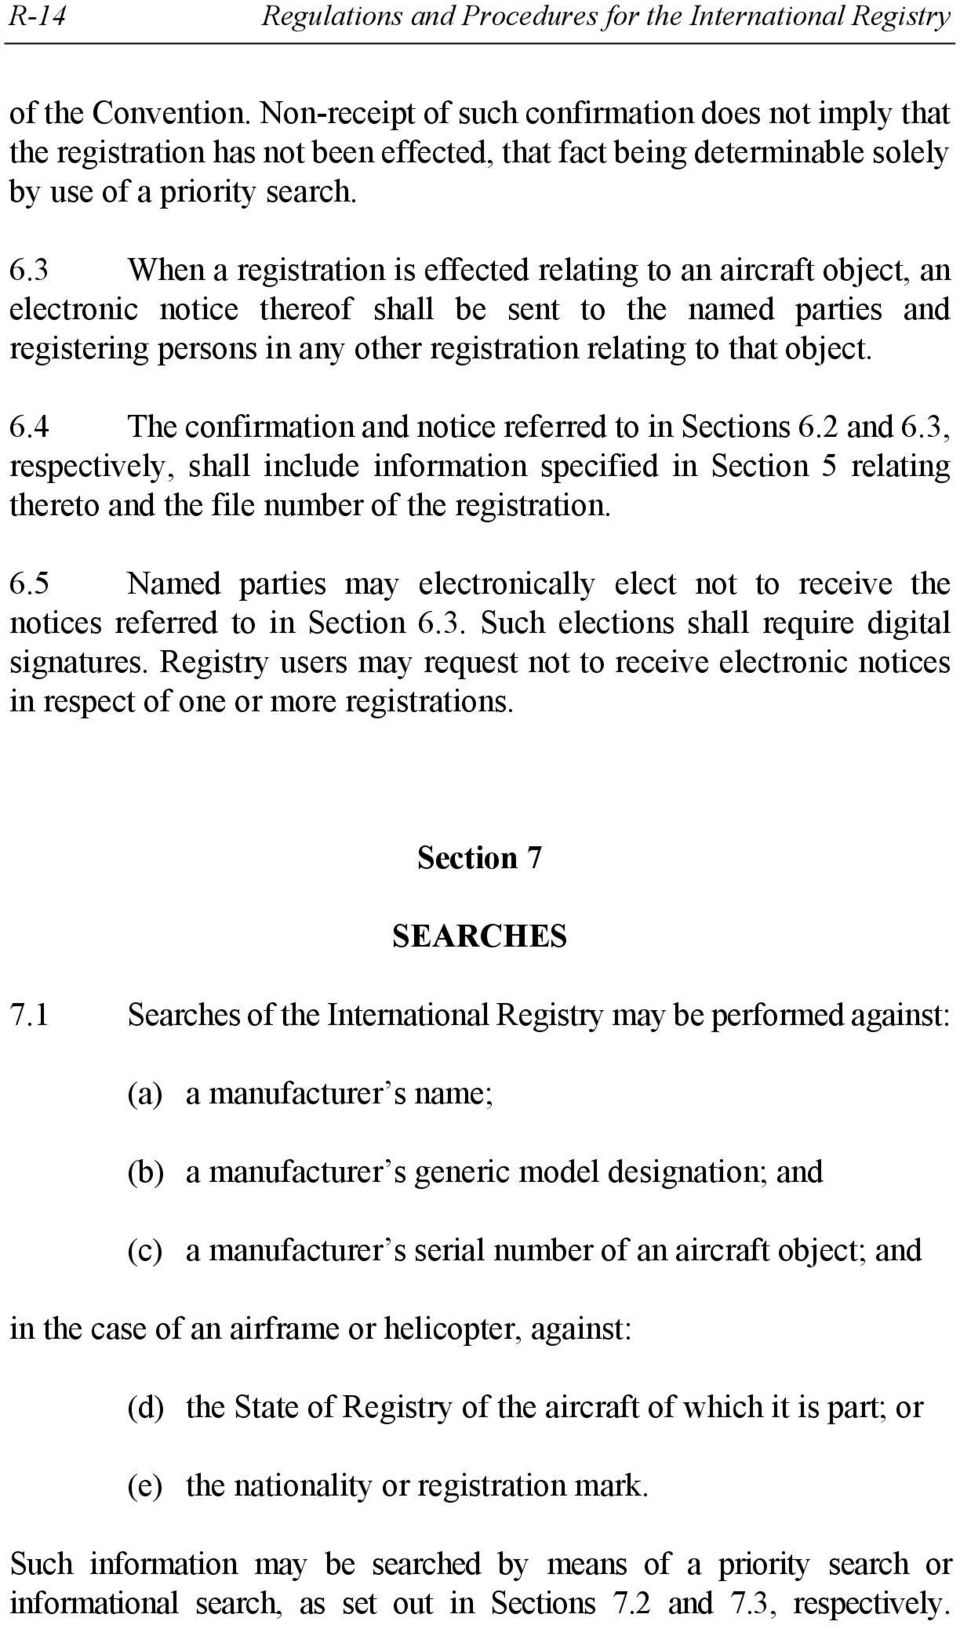 3 When a registration is effected relating to an aircraft object, an electronic notice thereof shall be sent to the named parties and registering persons in any other registration relating to that